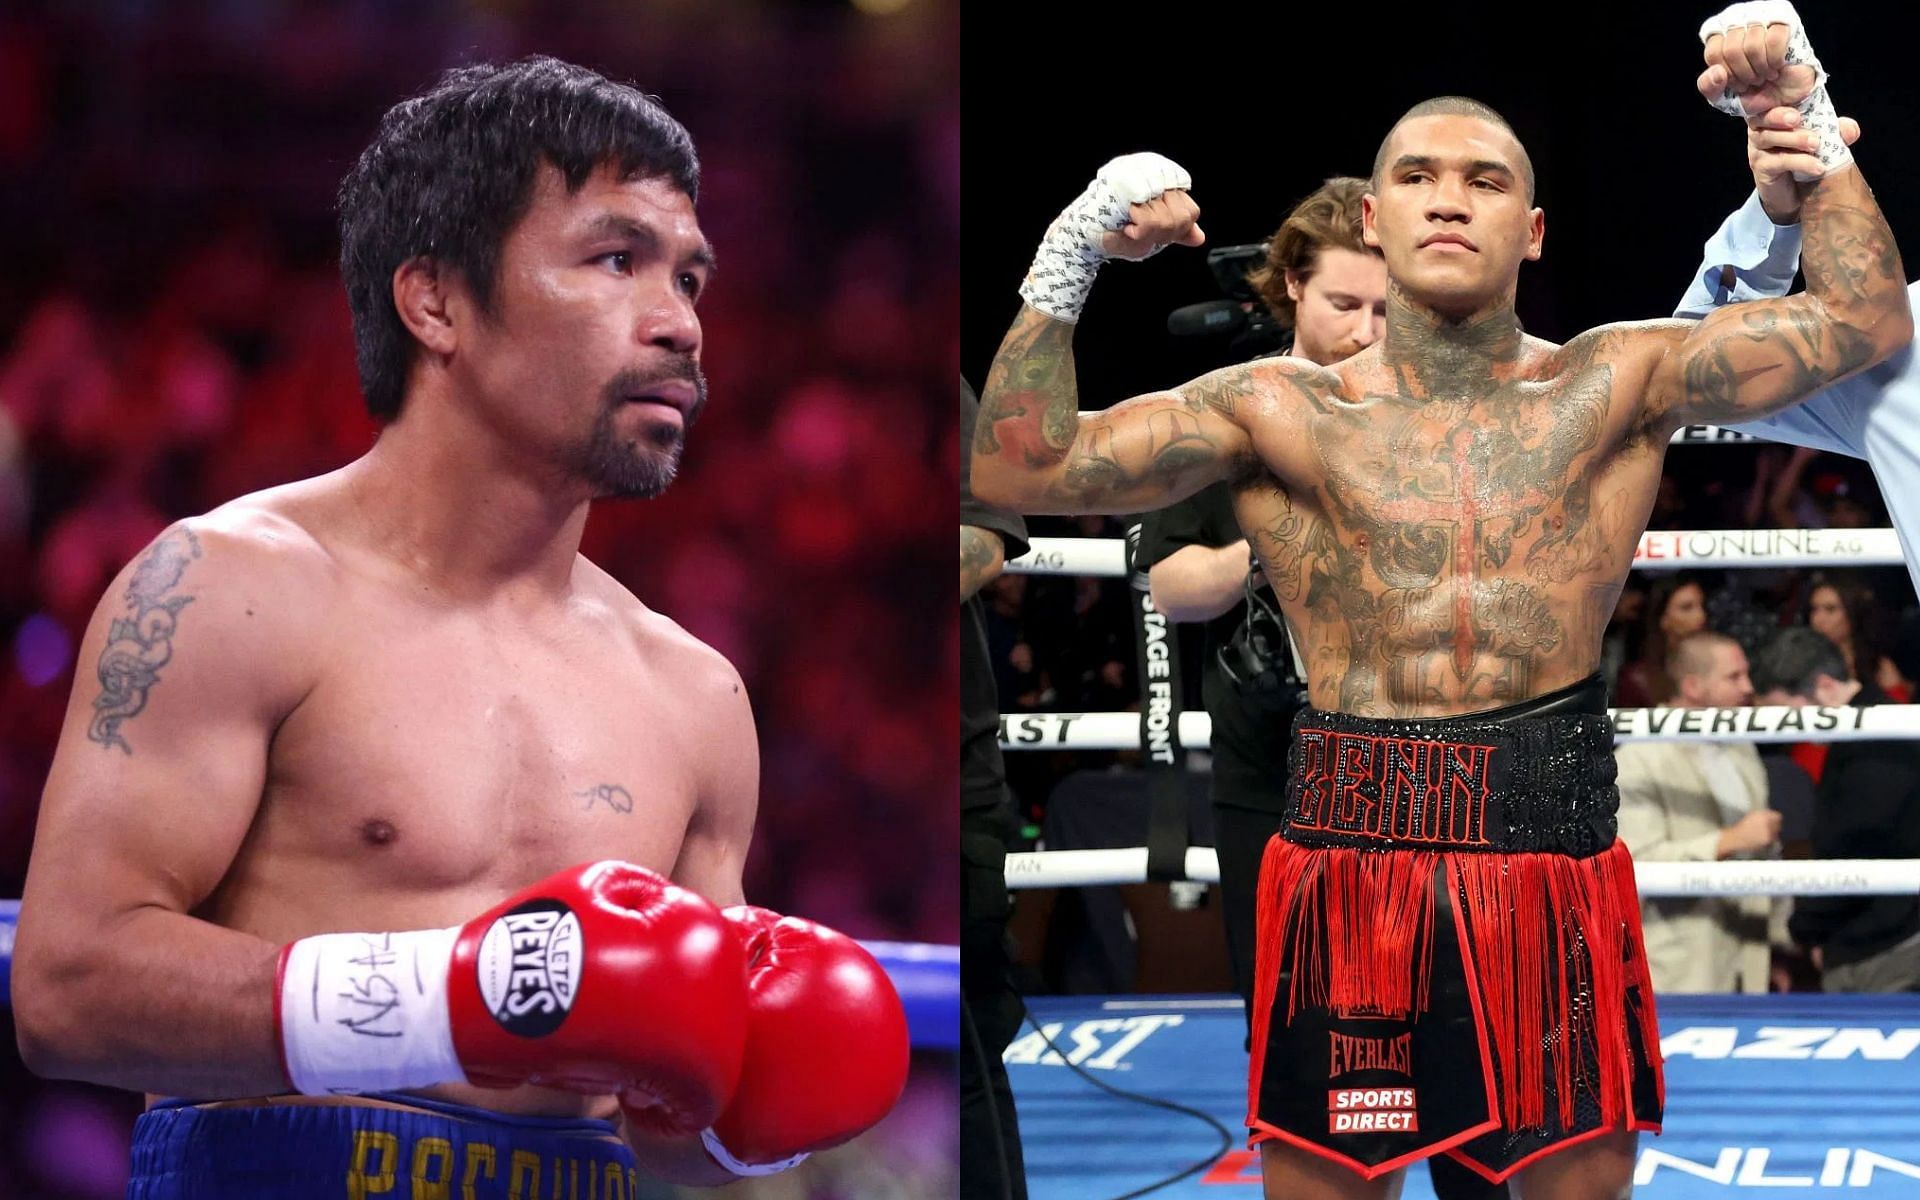 Manny Pacquiao (left) has indicated he would like to face Conor Benn (right) upon return to boxing, says Benn